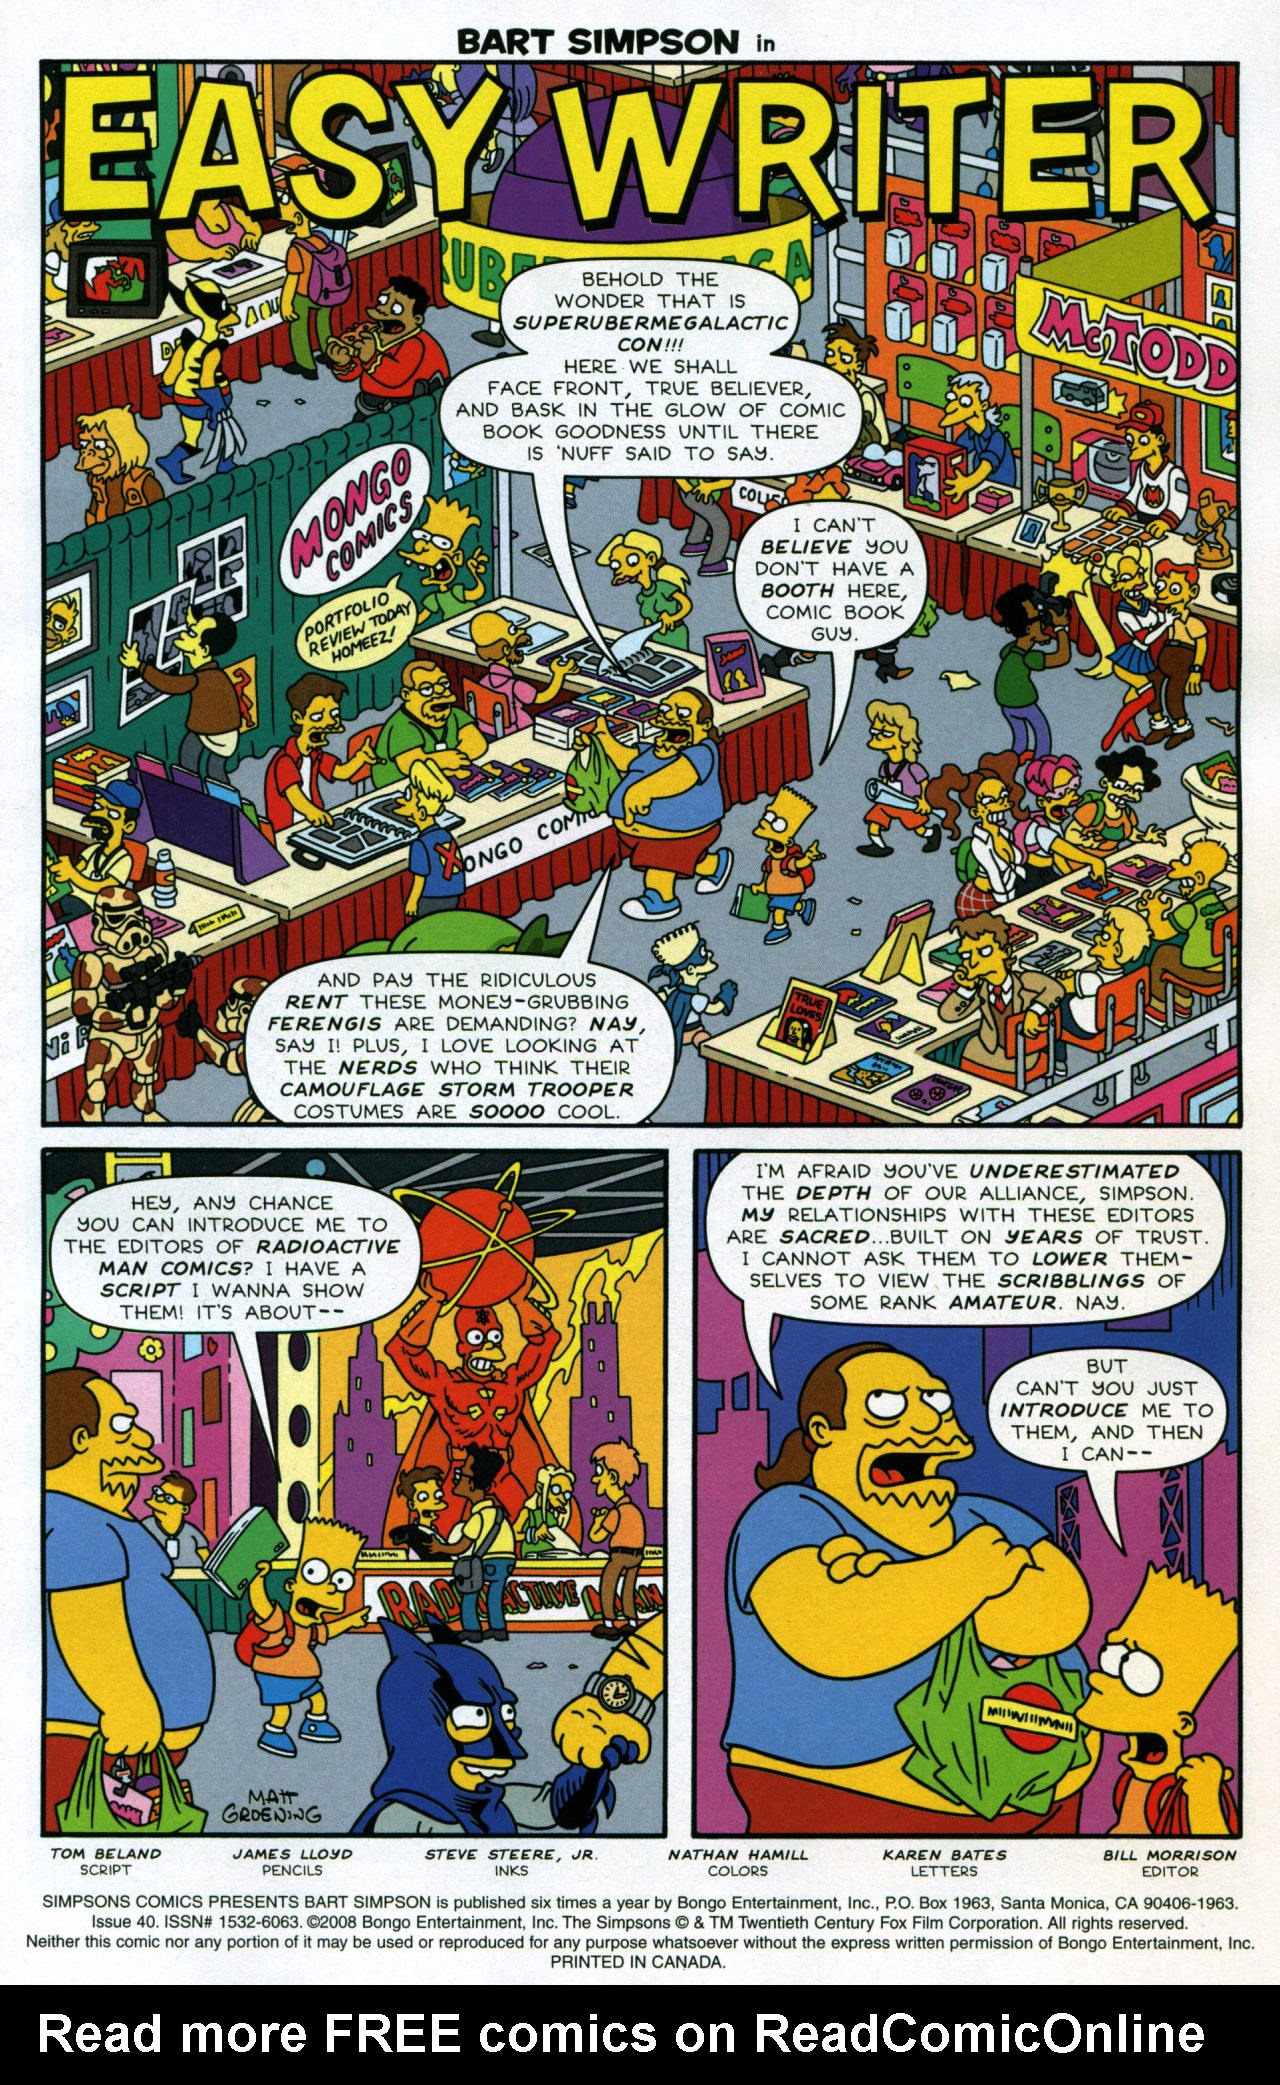 Simpsons Comics Presents Bart Simpson Issue 40 | Read Simpsons Comics  Presents Bart Simpson Issue 40 comic online in high quality. Read Full Comic  online for free - Read comics online in